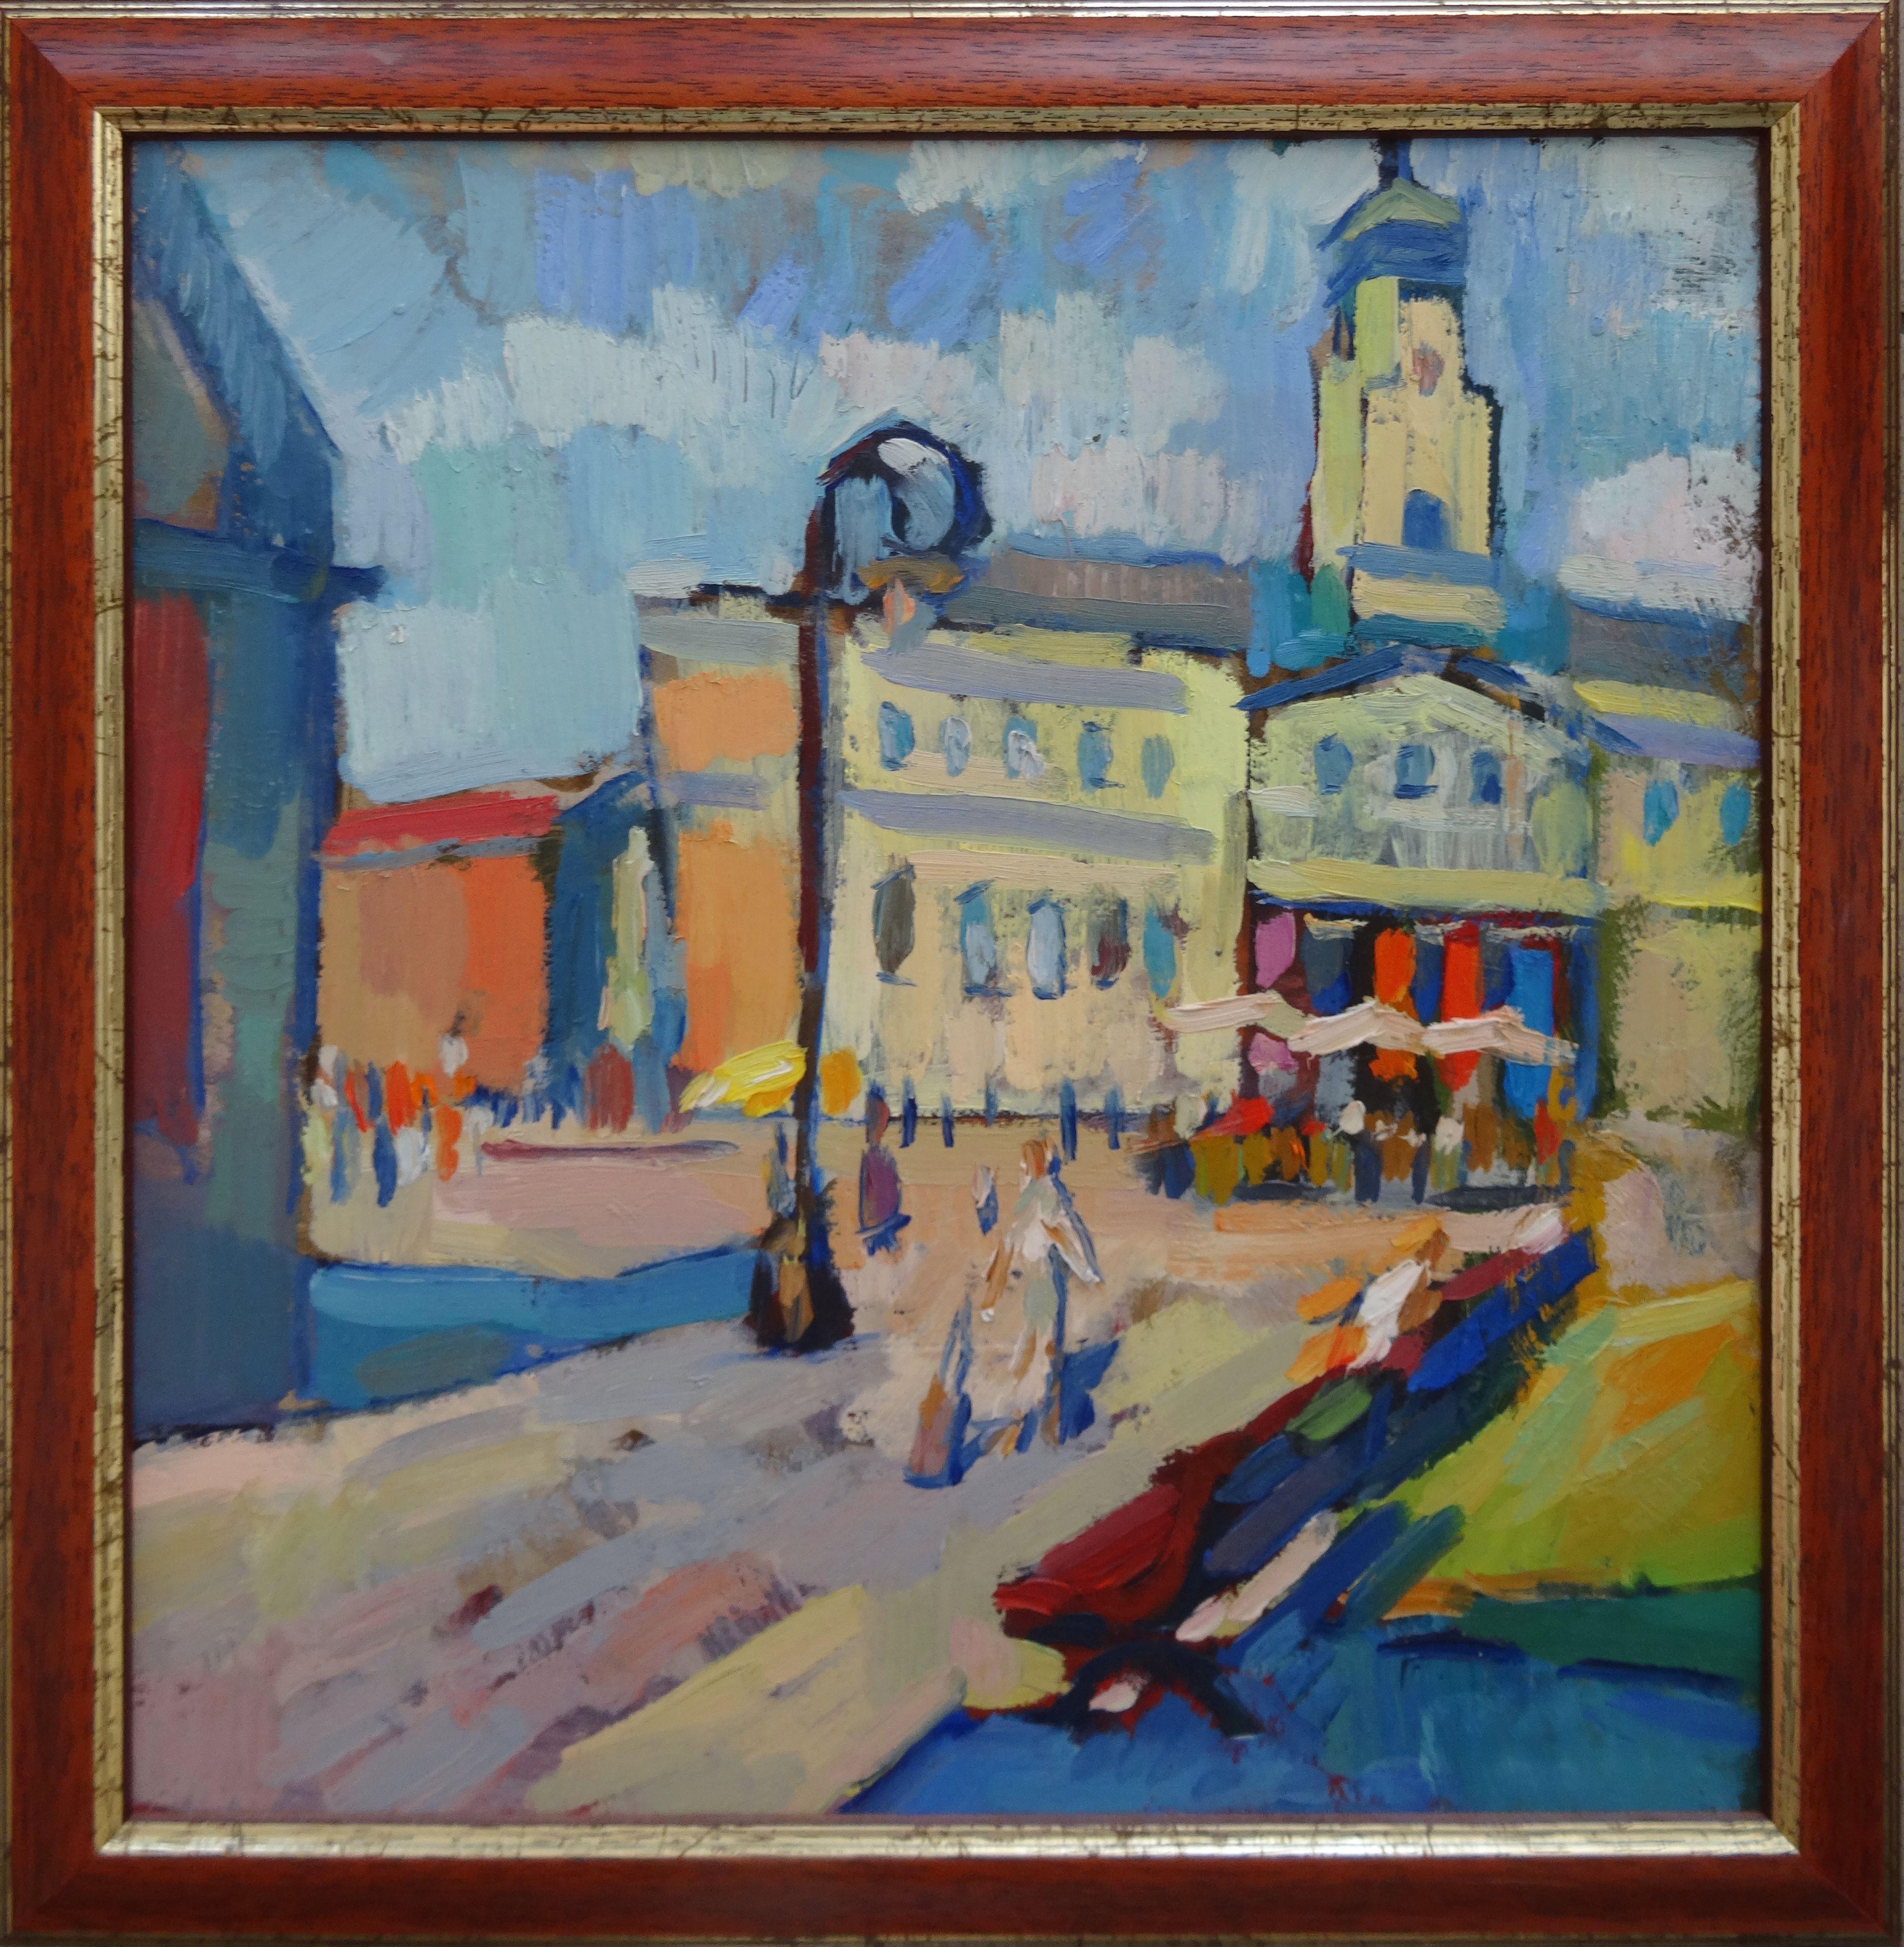 Old town. 2014, oil on cardboard, 31.5x32.5 cm - Painting by Vera Bondare